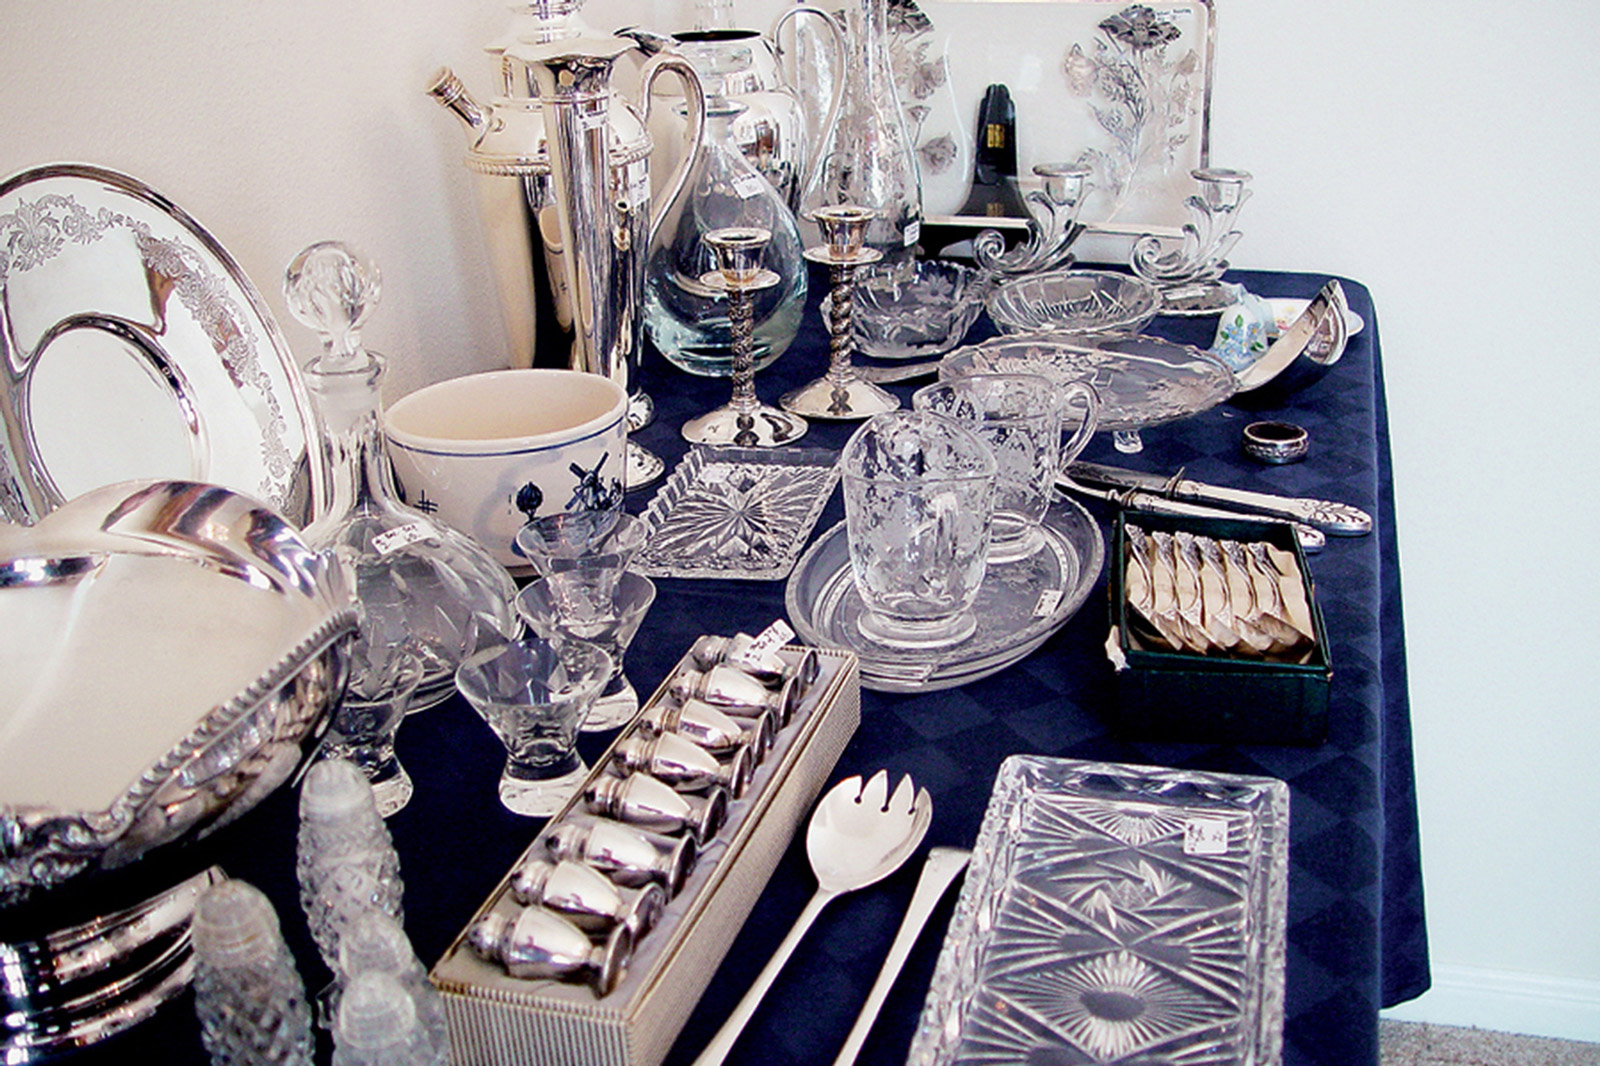 A photograph titled “Last Supper” depicting an array of tableware, from Casey Logan’s two thousand and seven artist project titled “Shopping in Sin.”